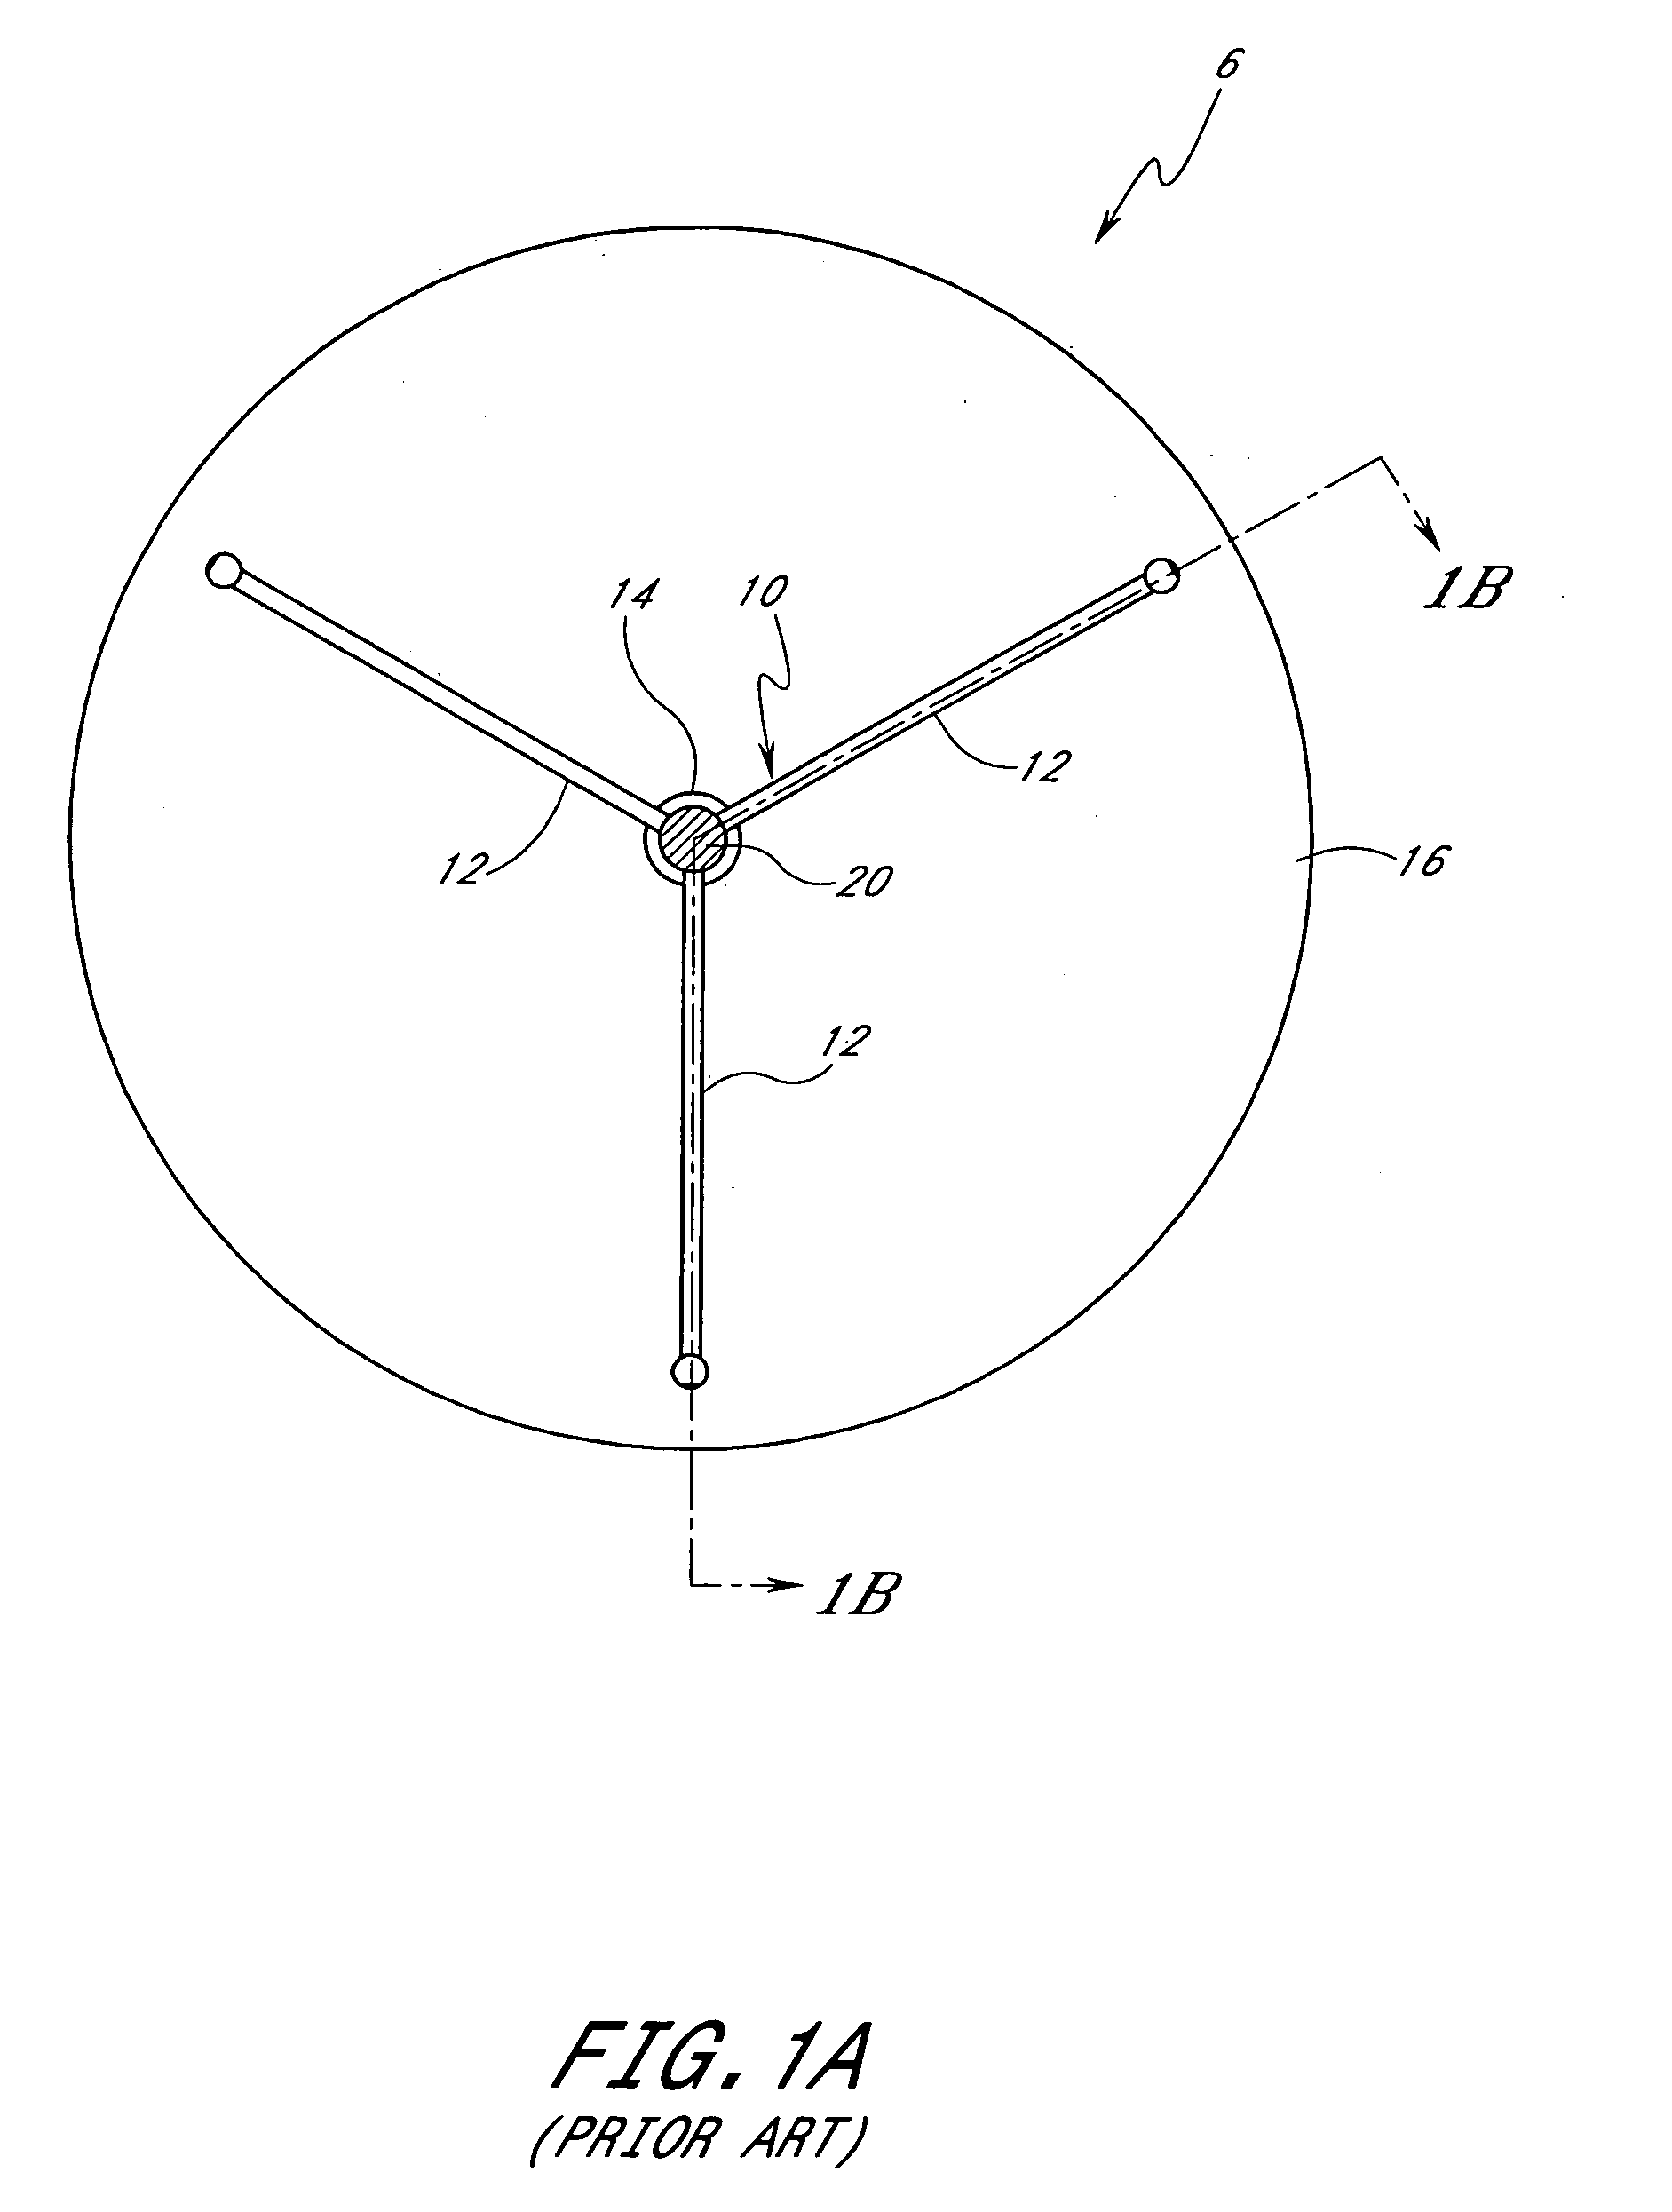 Apparatus and methods for preventing rotational slippage between a vertical shaft and a support structure for a semiconductor wafer holder